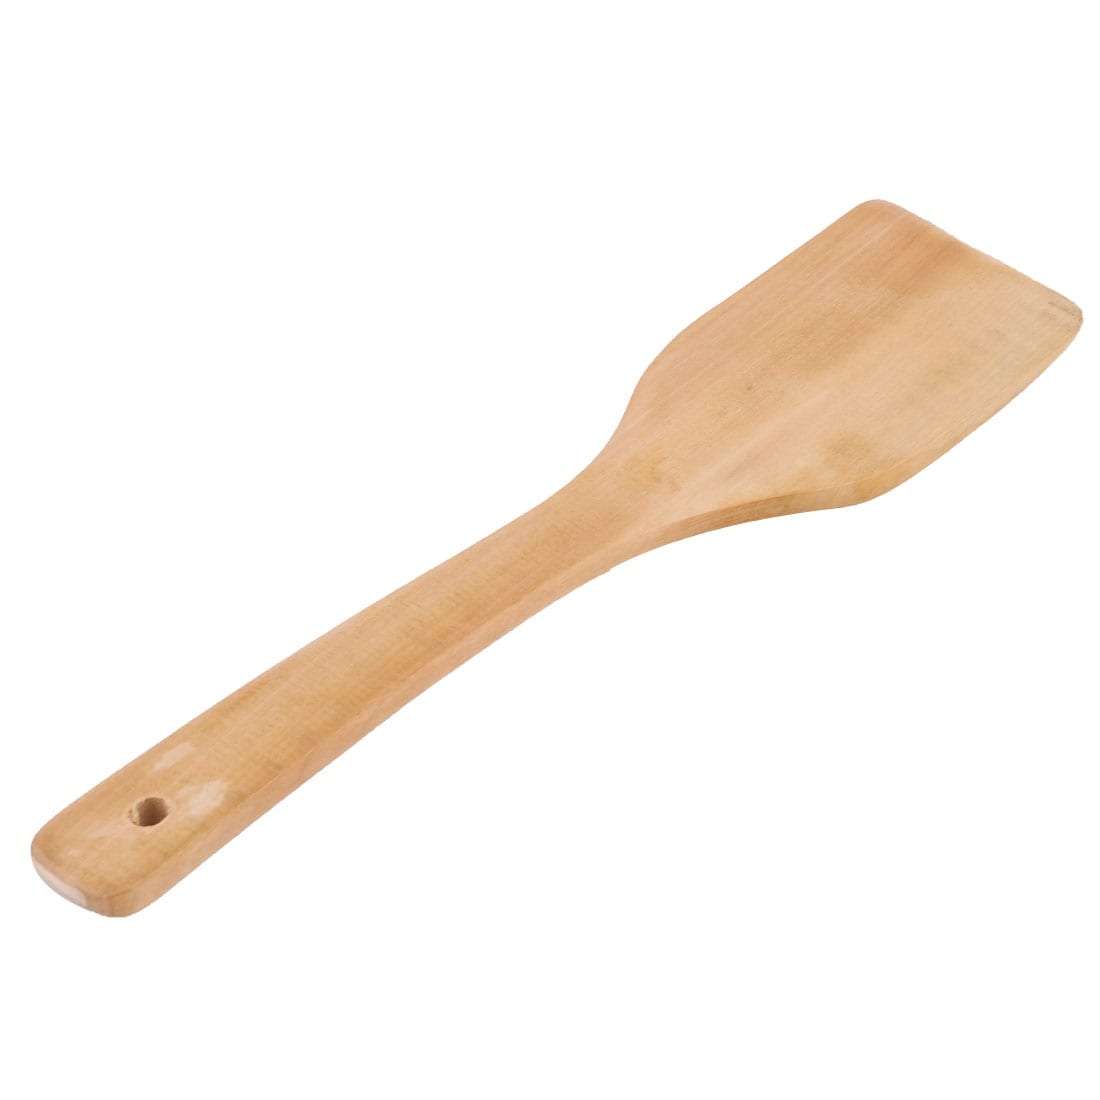 https://ak1.ostkcdn.com/images/products/is/images/direct/8e8ffd0c709a4e99eabaf90dc4fc1ec236c4d615/Household-Kitchen-Wood-Flat-Cooking-Serving-Spatula-Rice-Spoon-Paddle-Ladle.jpg